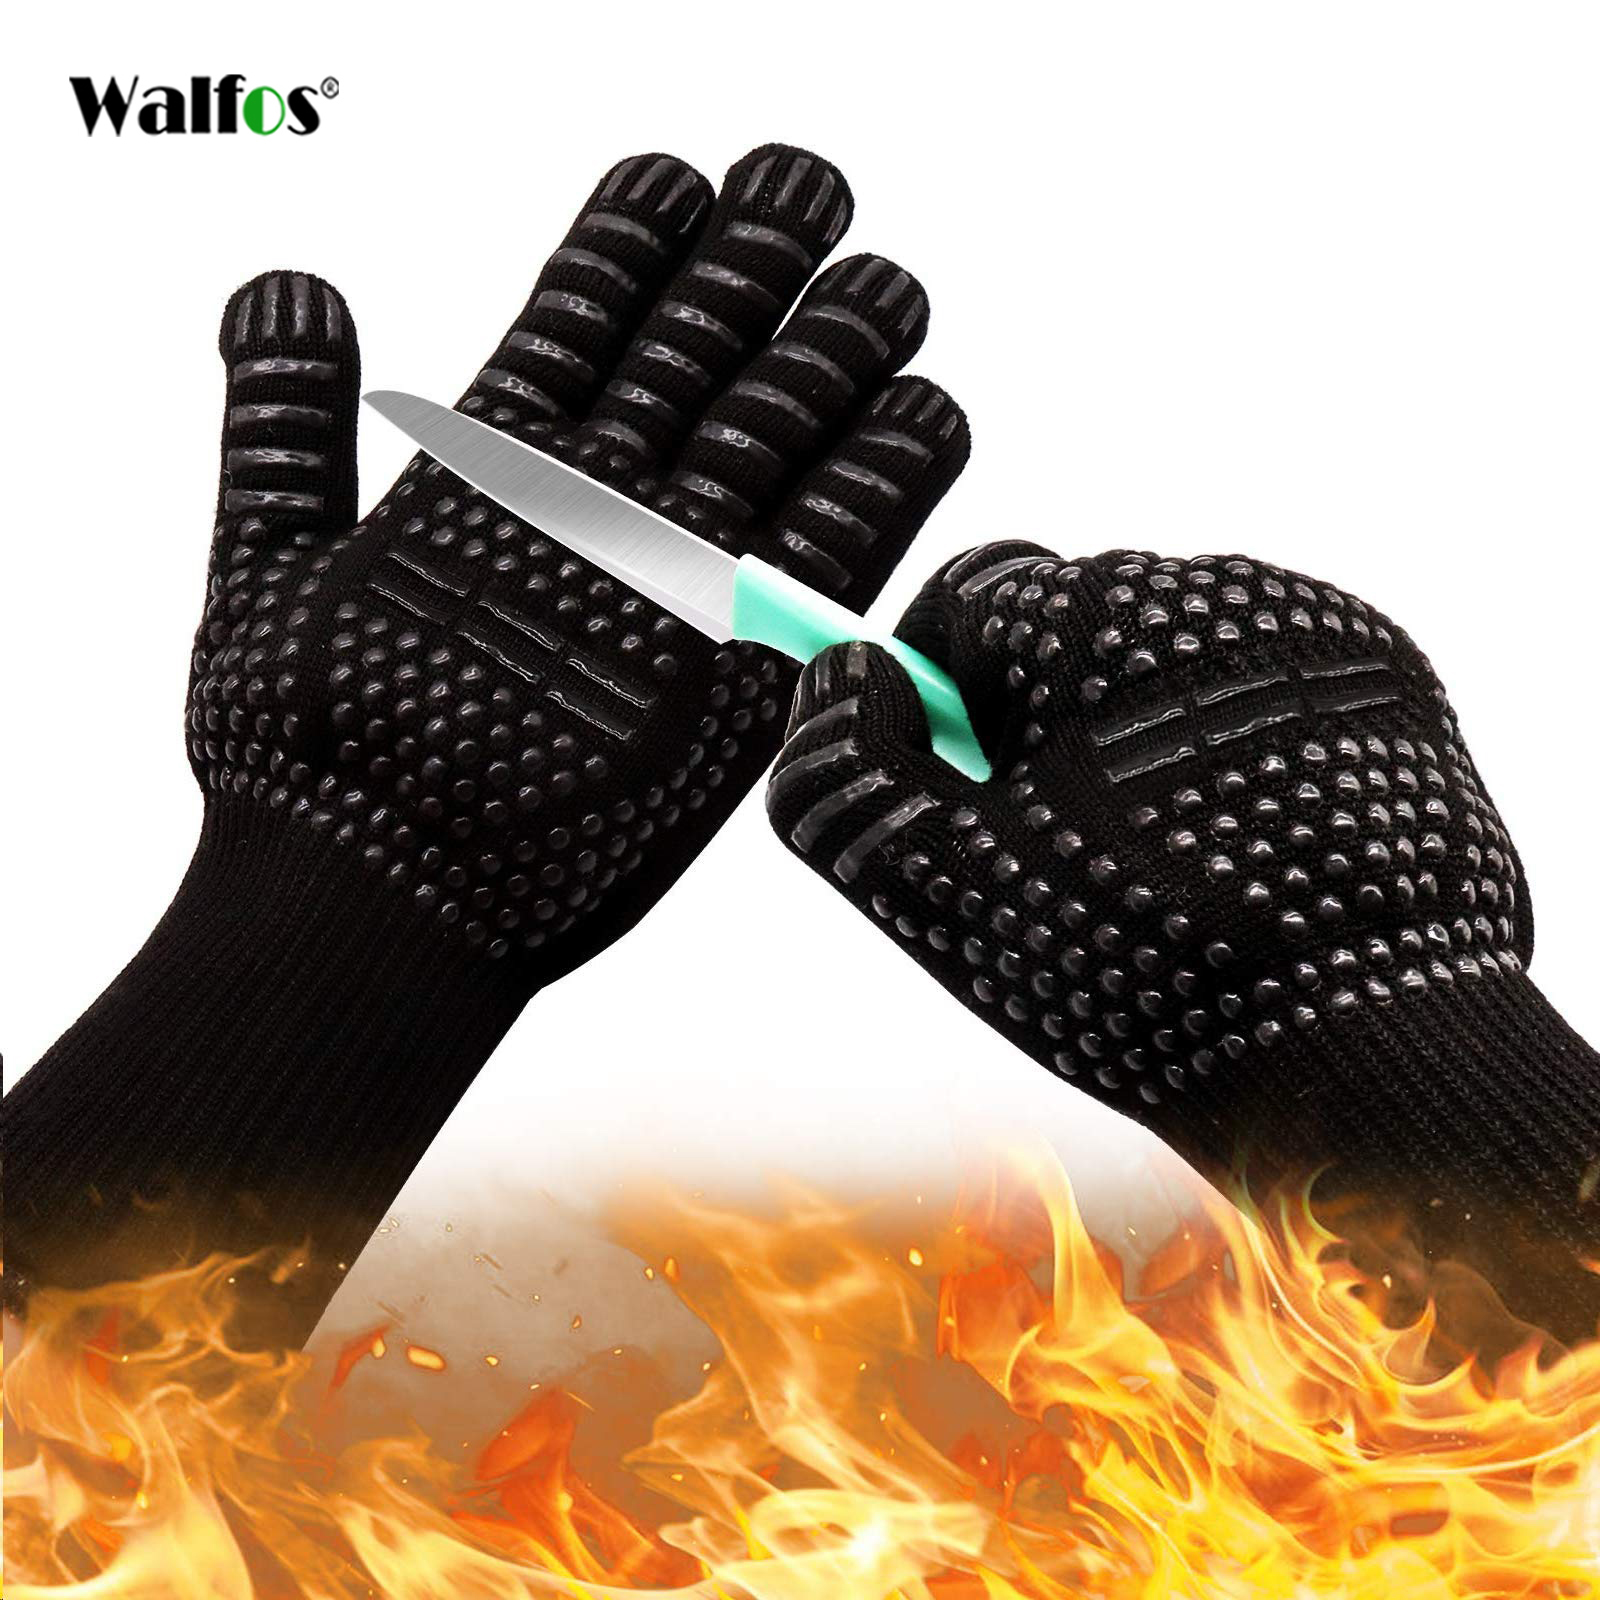 2 PAIRS Heat Resistant Gloves Oven Gloves Heat Resistant Black BBQ Gloves For Grilling BBQ Gloves Heat Resistant Cooking Heat Resistant Gloves Kitchen Heat Gloves High Temp Grill Gloves with Silicone 